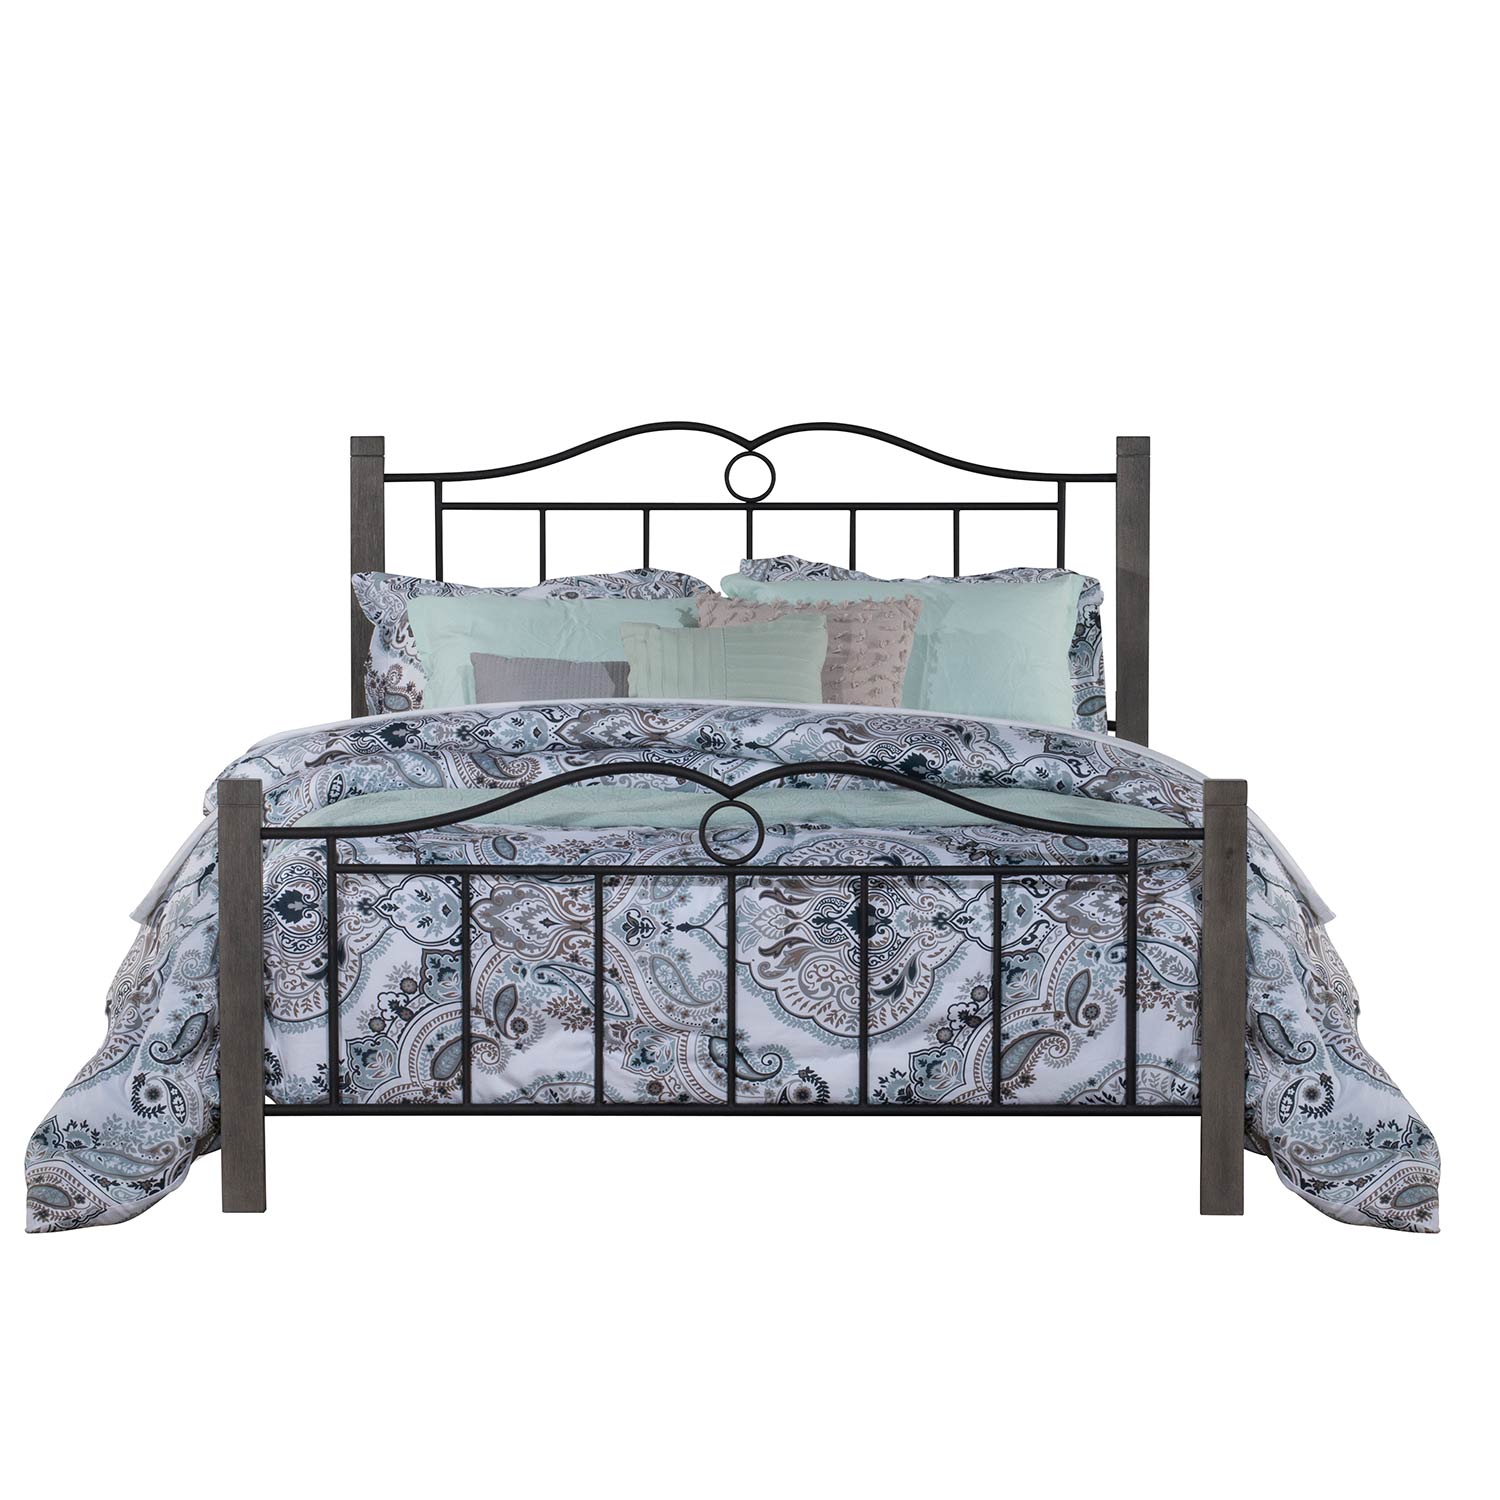 Hillsdale Dumont Metal Bed with Double Arched Scroll Design - Textured Black/Brushed Charcoal